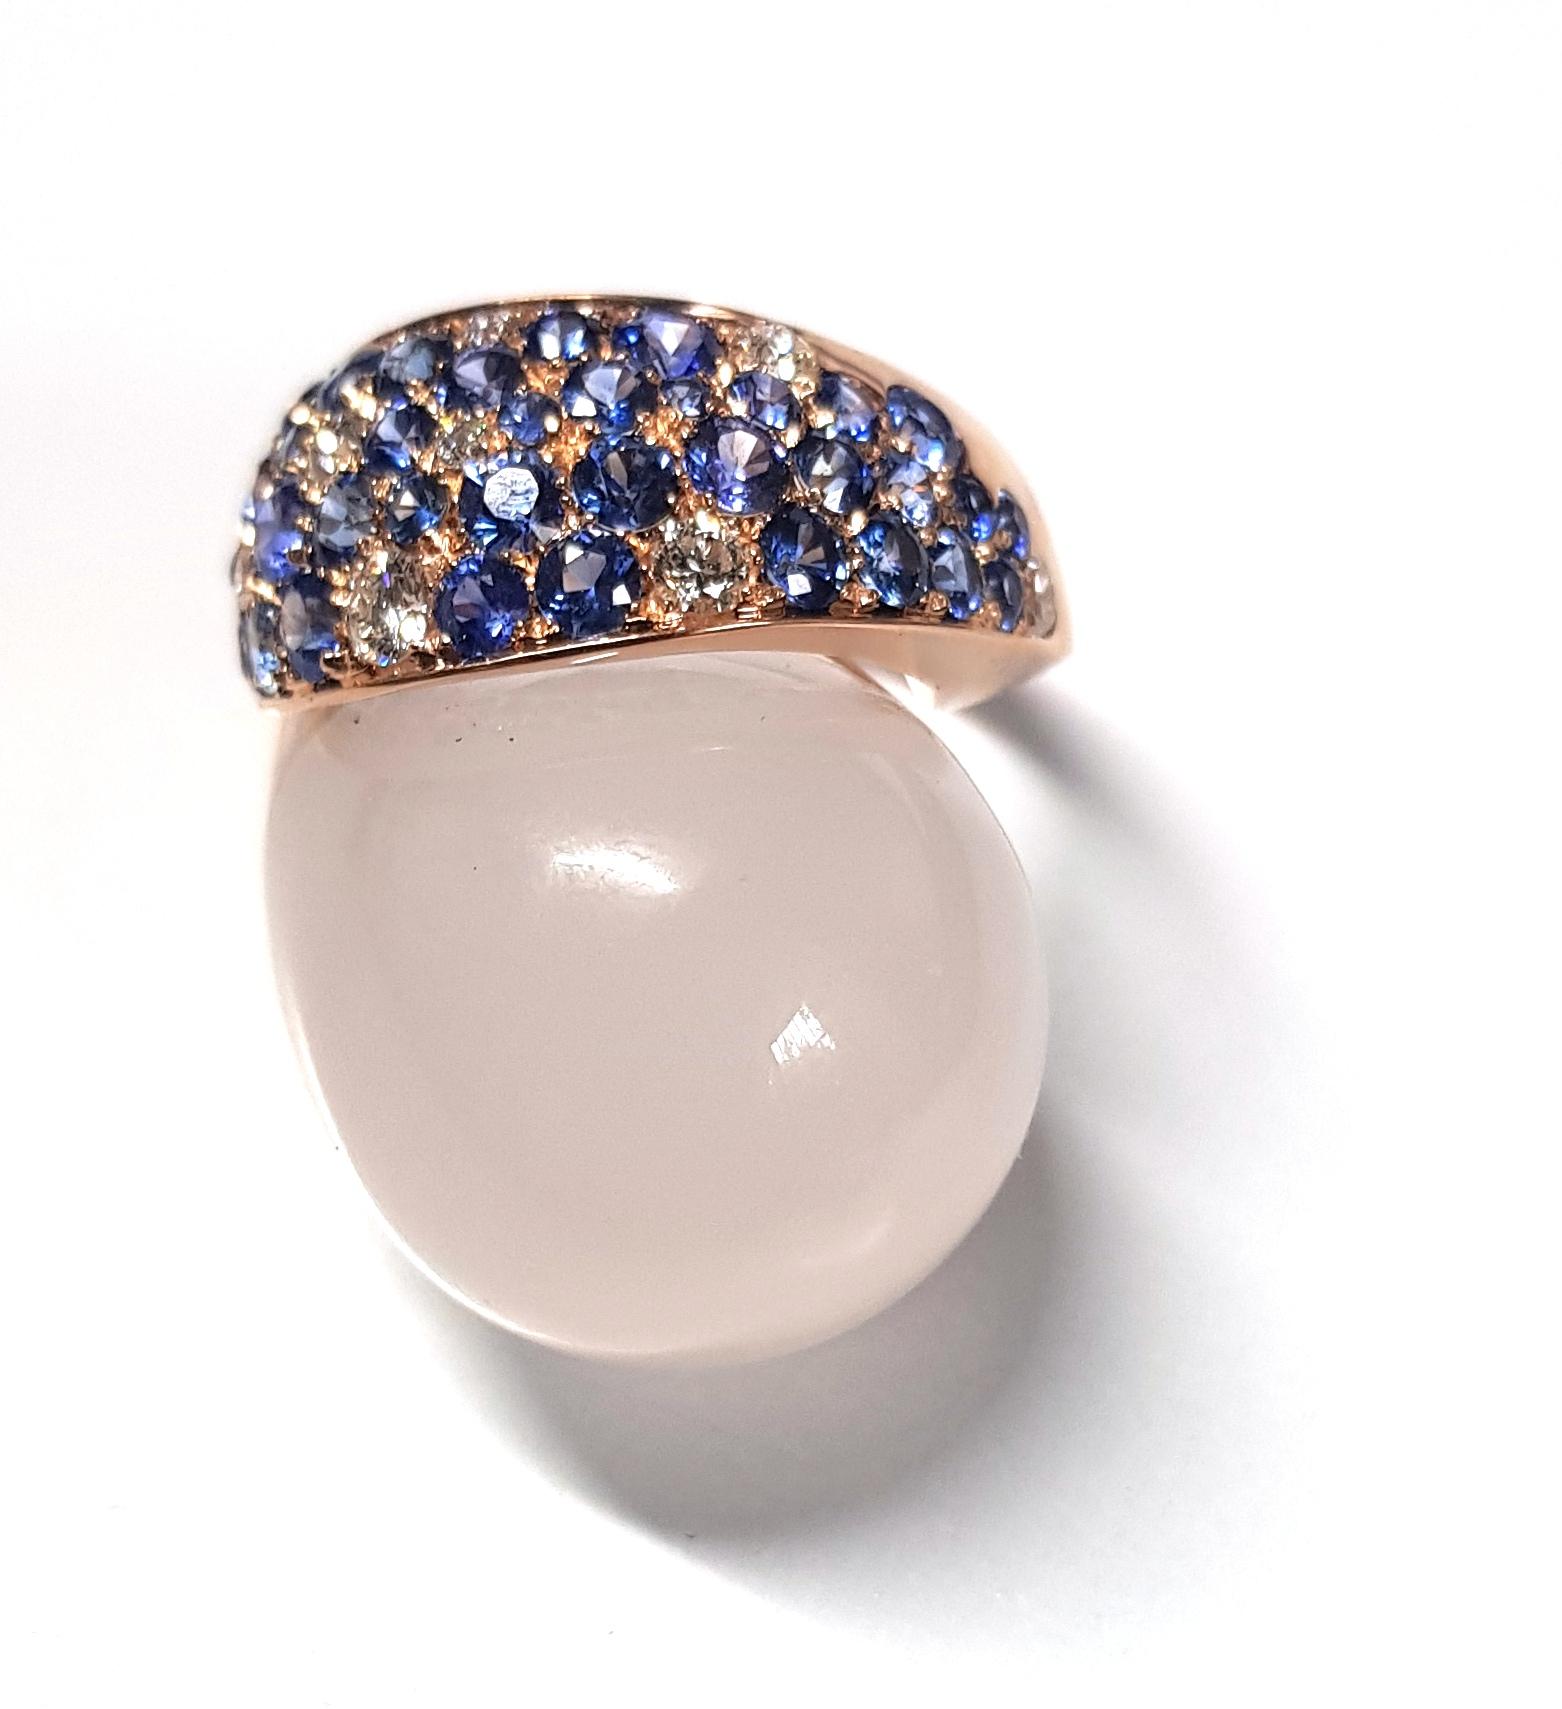 Enchanting round shape like a full moon, the Moony ring is handcrafted in Margherita Burgener workshop, Italy.
Rose gold is suspending a full moon of white quartz, translucent and bright.
Aside a full pavé of blue sapphires and diamonds creating a